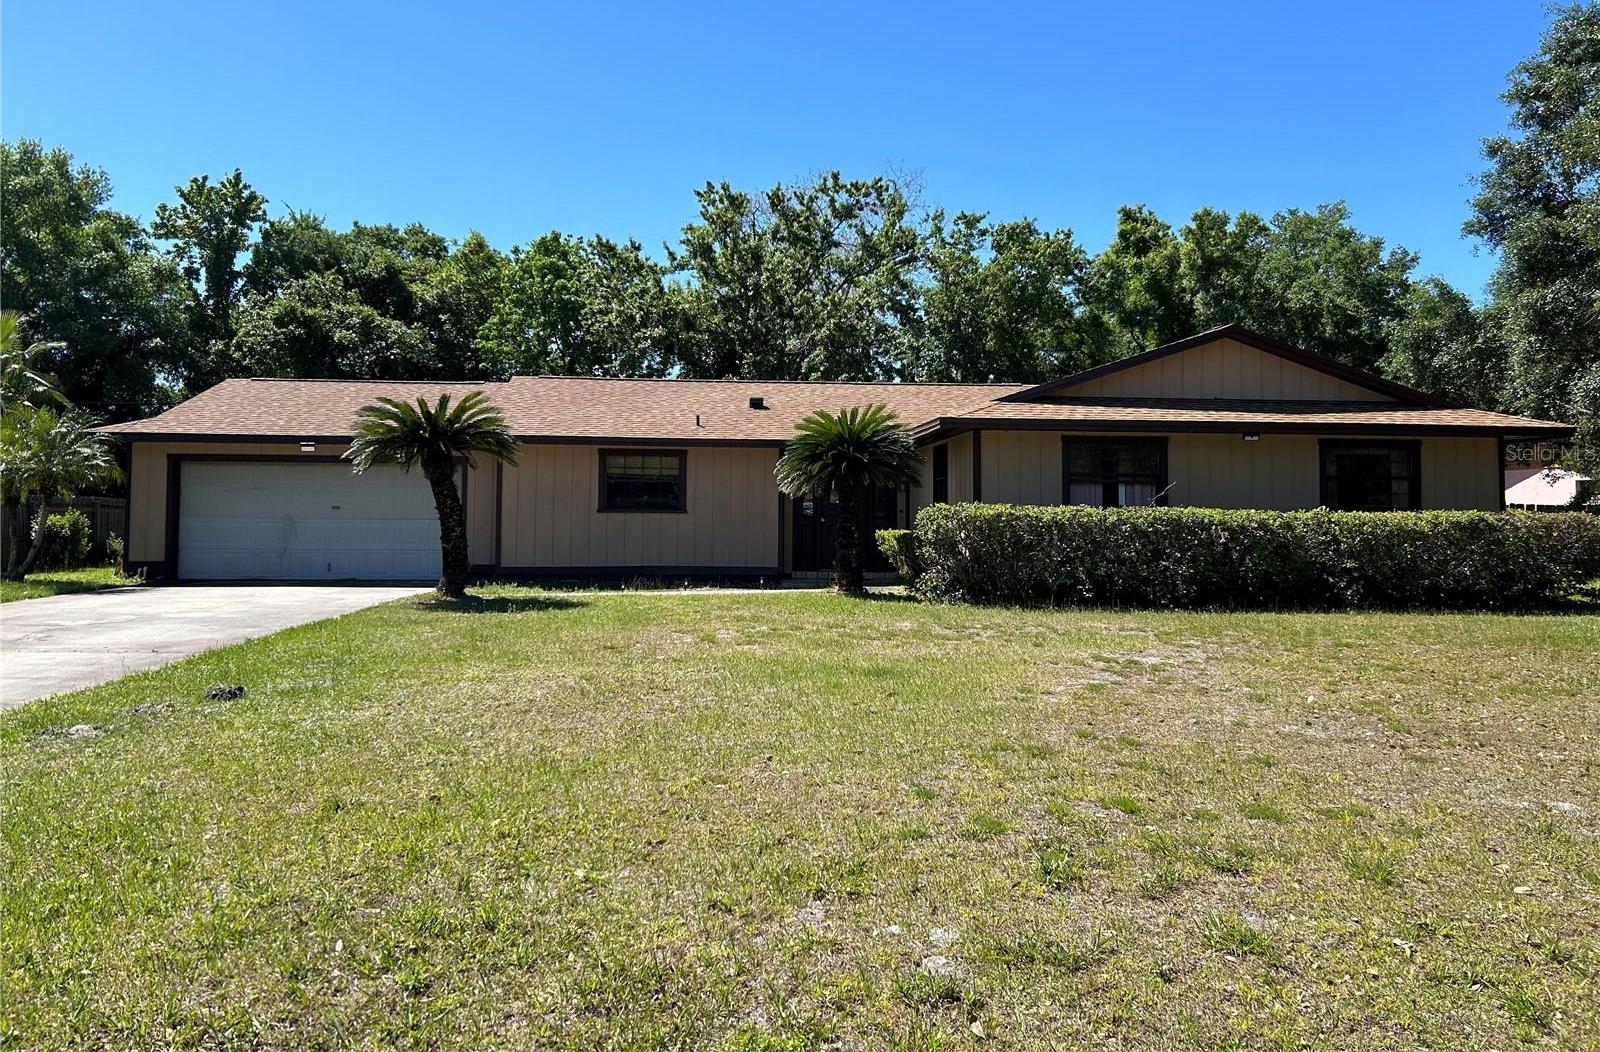 Photo one of 4960 Lake Cecile Dr Kissimmee FL 34746 | MLS S5101628